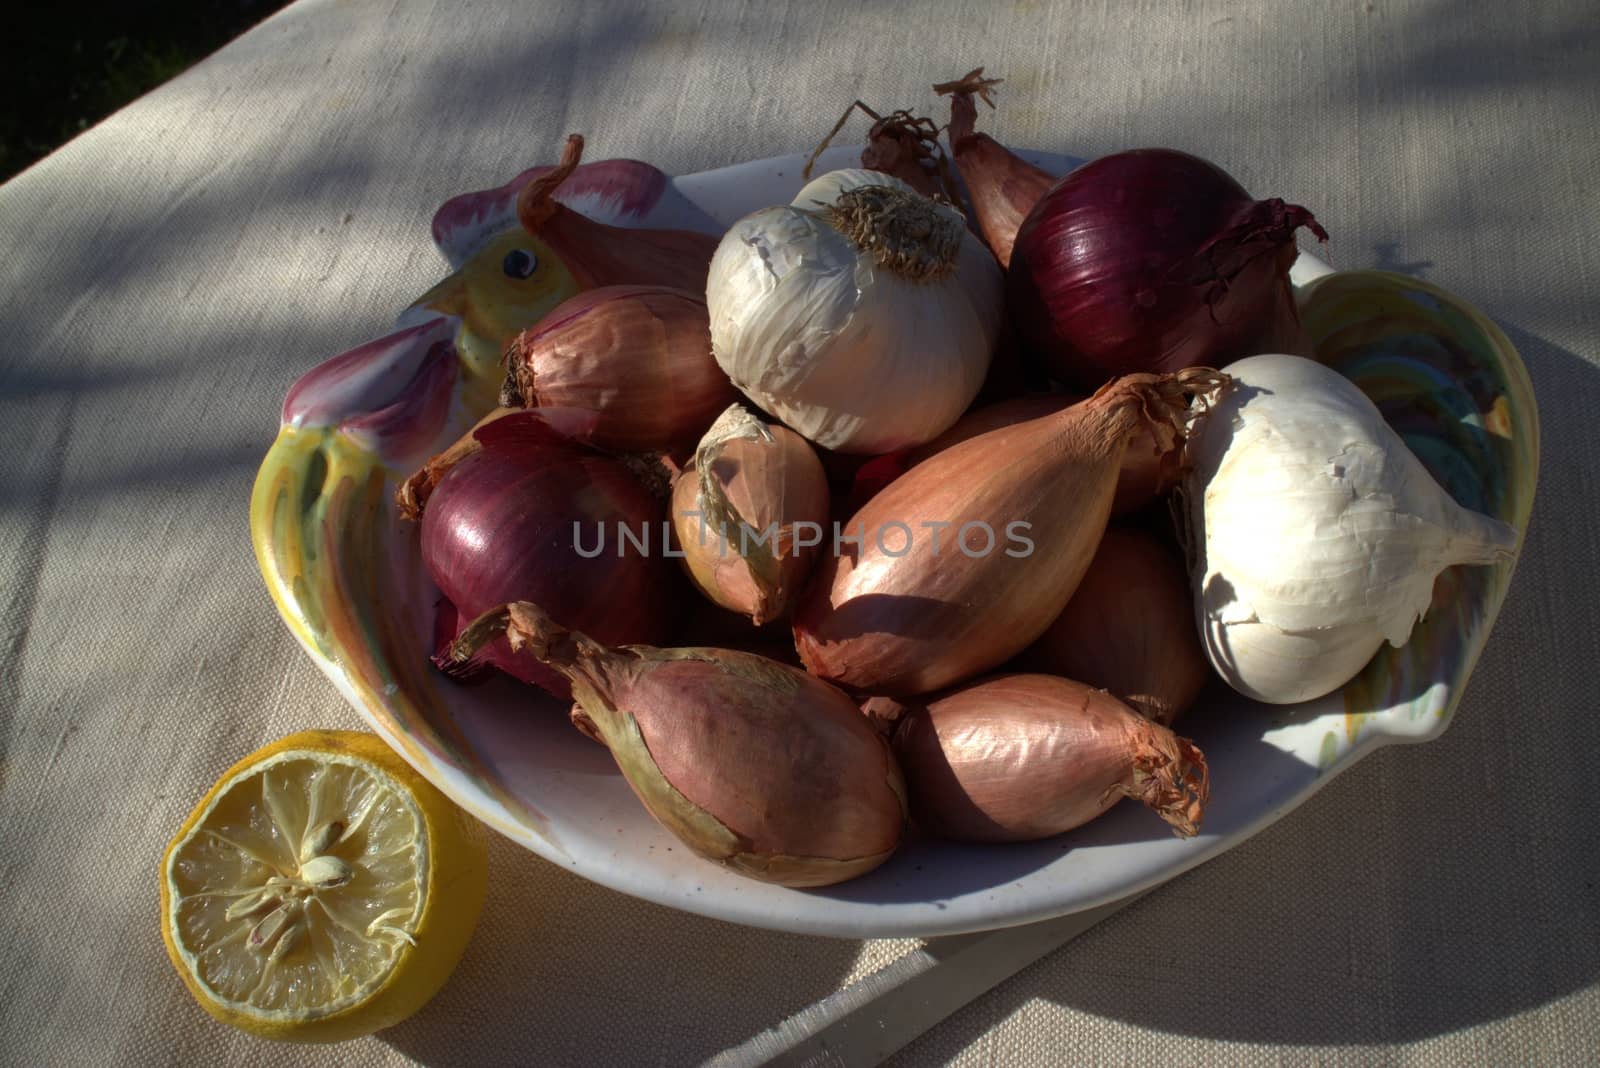 Onions by tozzimr